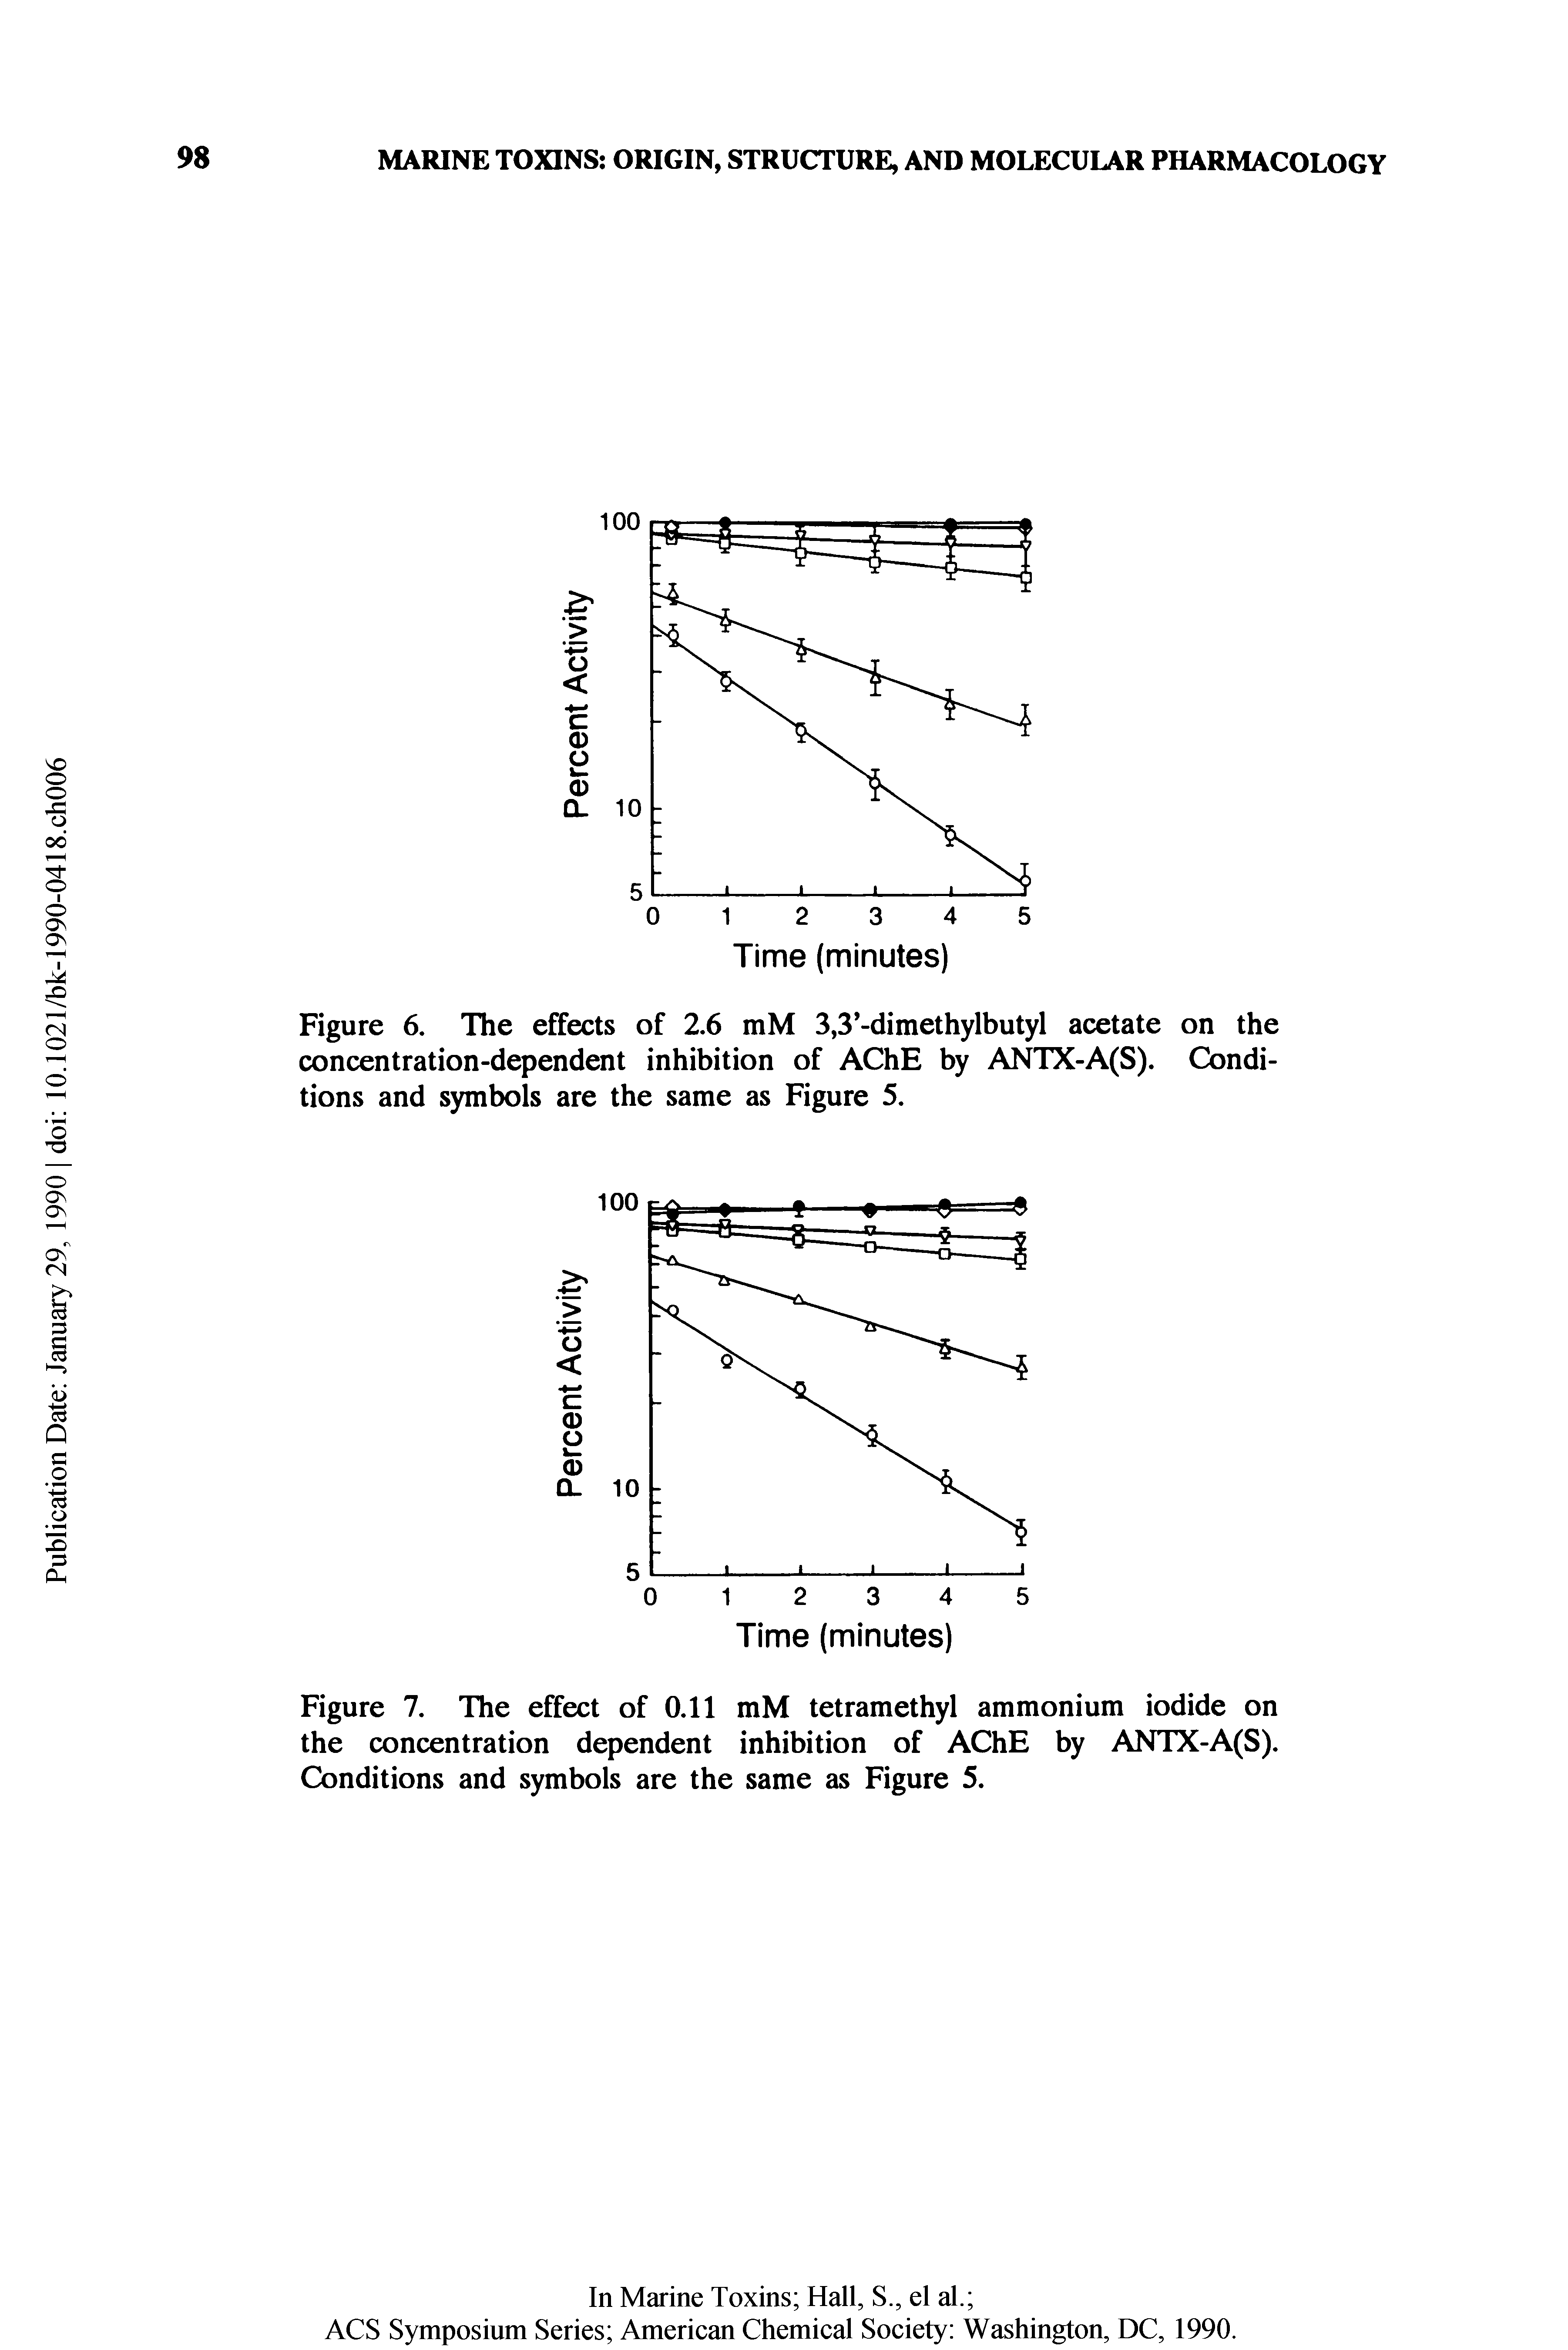 Figure 7. The effect of 0.11 mM tetramethyl ammonium iodide on the concentration dependent inhibition of AChE by ANTX-A(S). Conditions and symbols are the same as Figure 5.